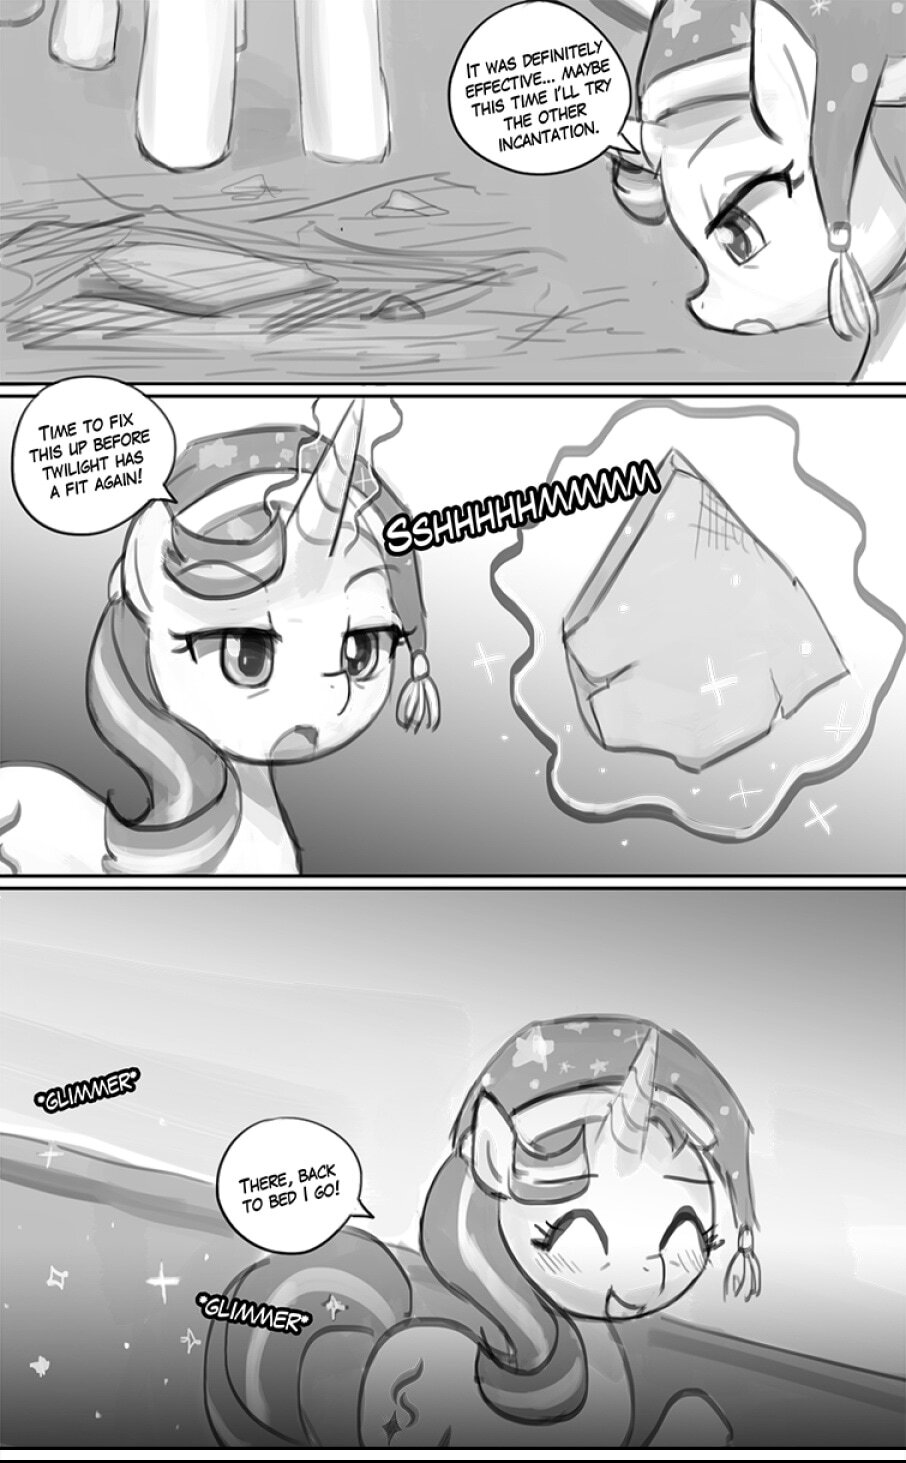 Homesick Part 2: Hearth's Warming Eve - Page 3